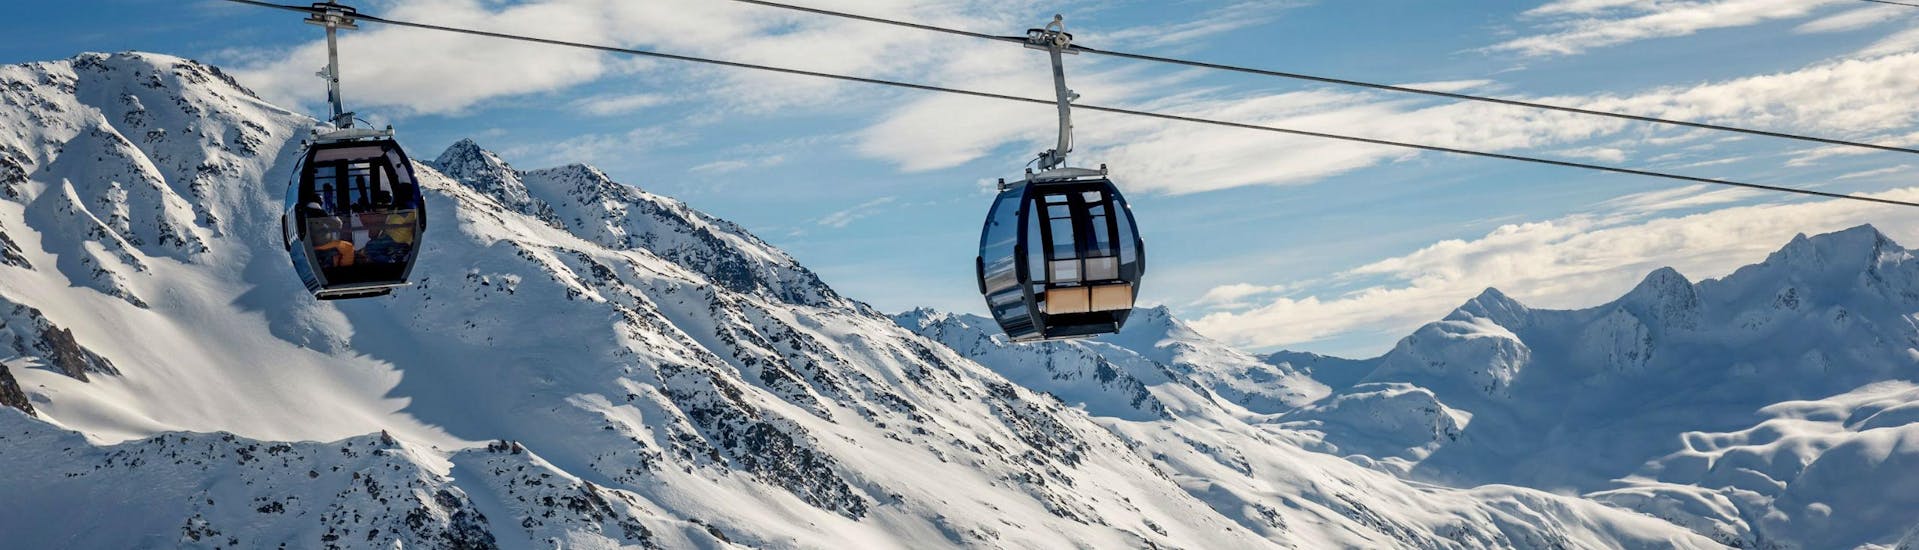 A view of the cable car carrying skiers up to the top of the mountain in the ski resort of Andermatt, not too far from Lucerne, where local ski schools offer a selection of ski lessons.